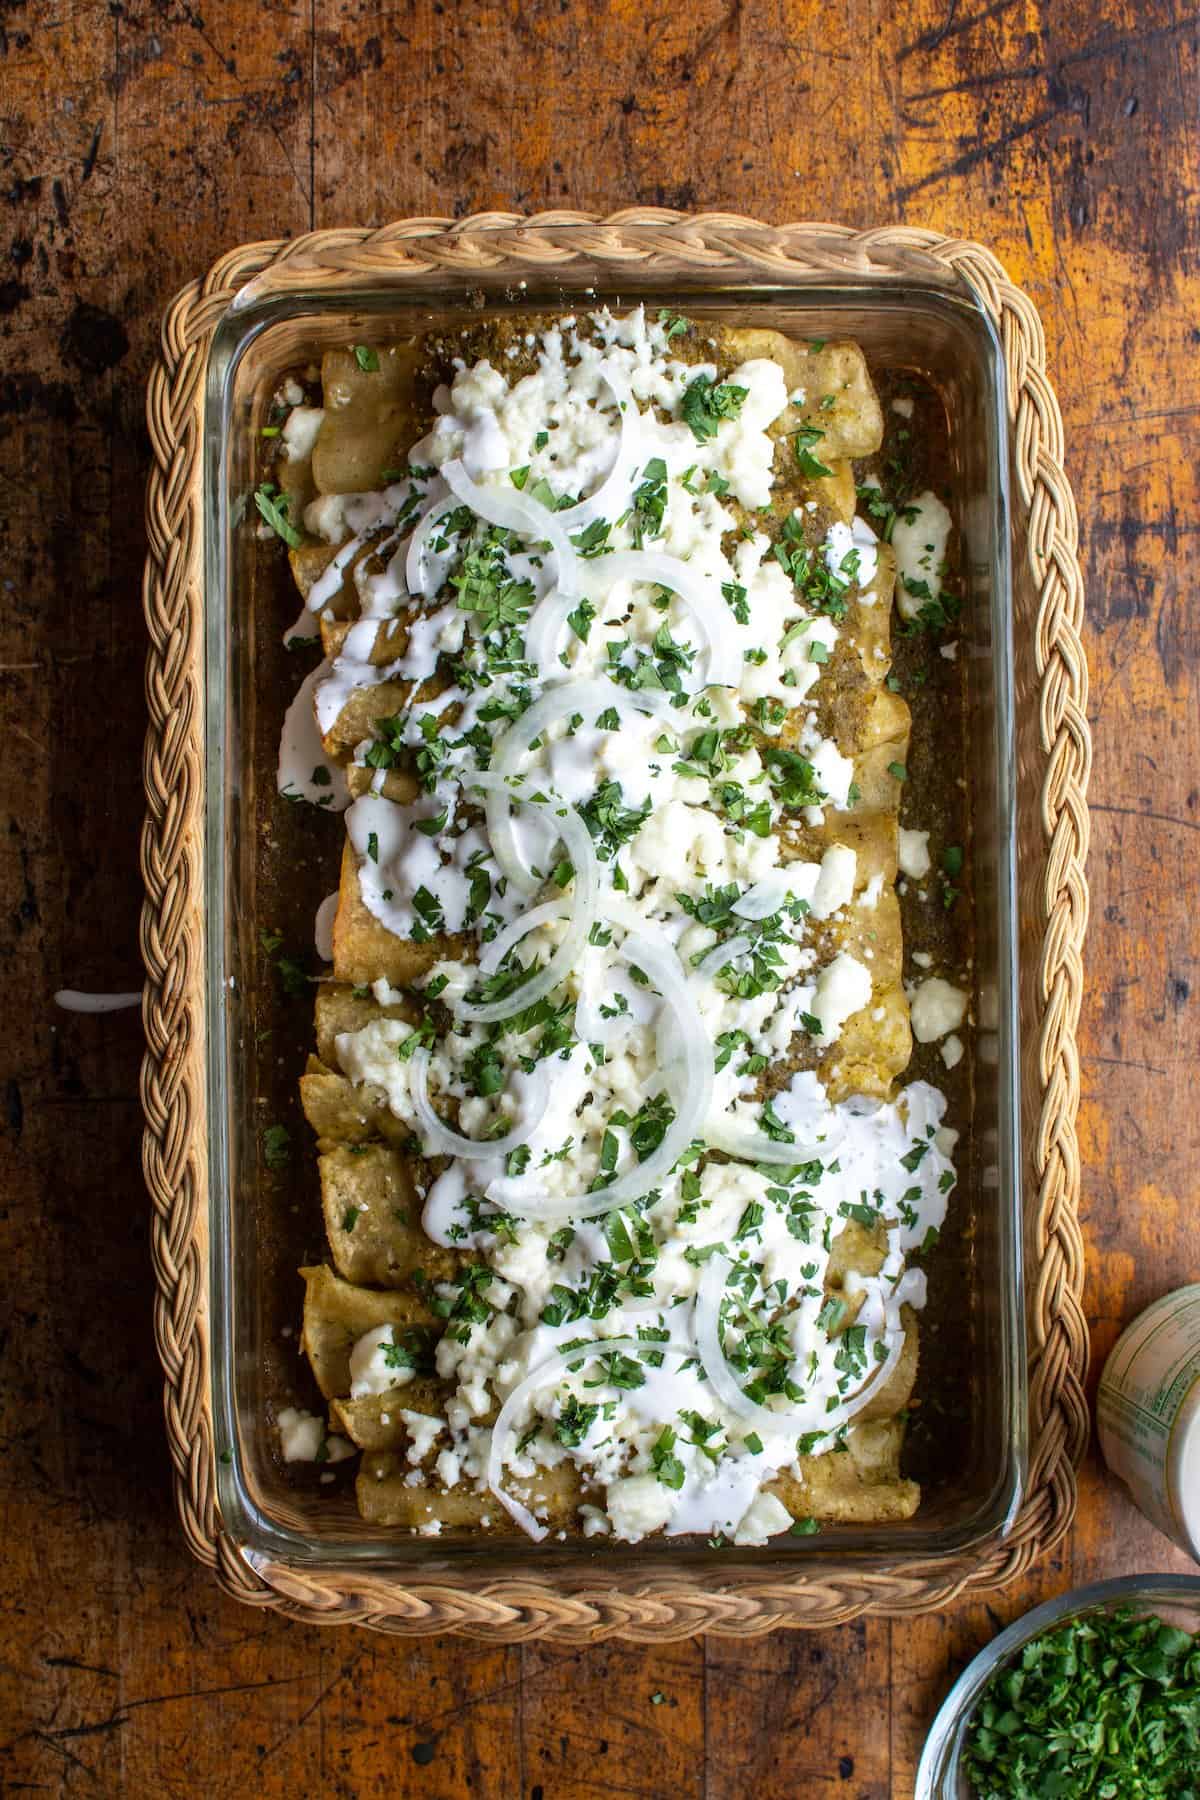 A baking dish filled with enchiladas verdes covered in a whicker basket on a wood table.